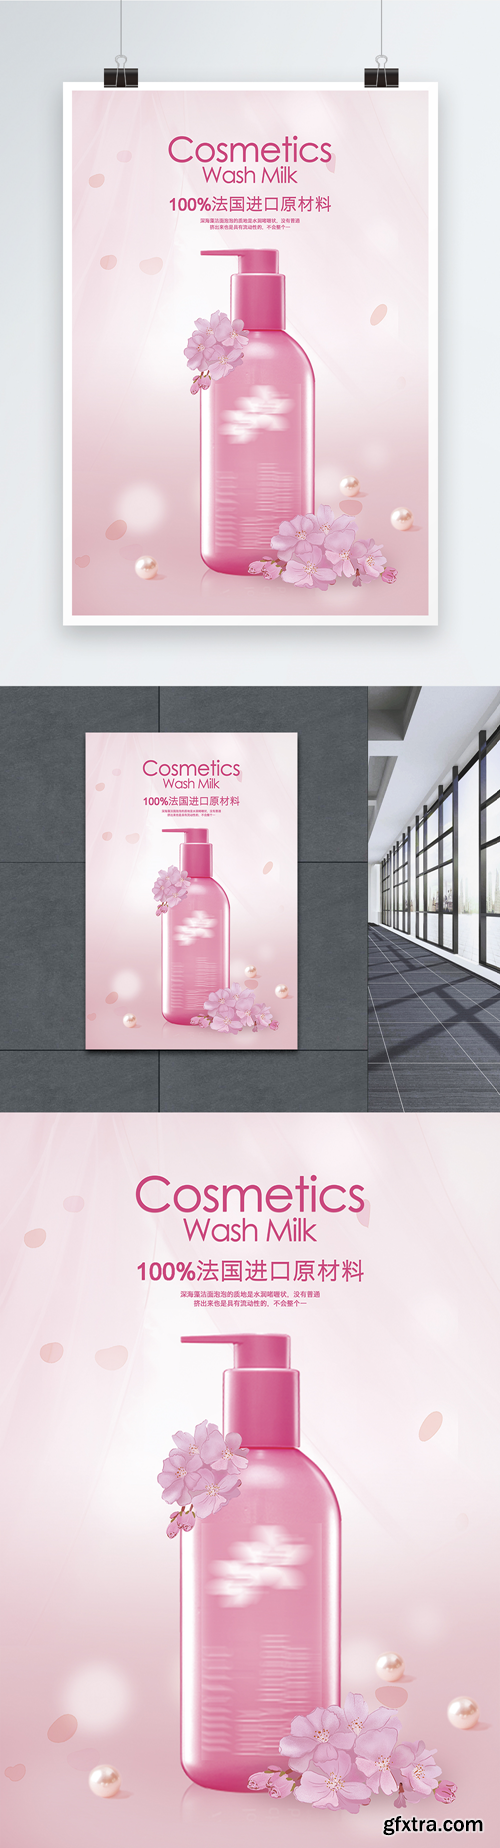 pink and fresh cosmetics posters